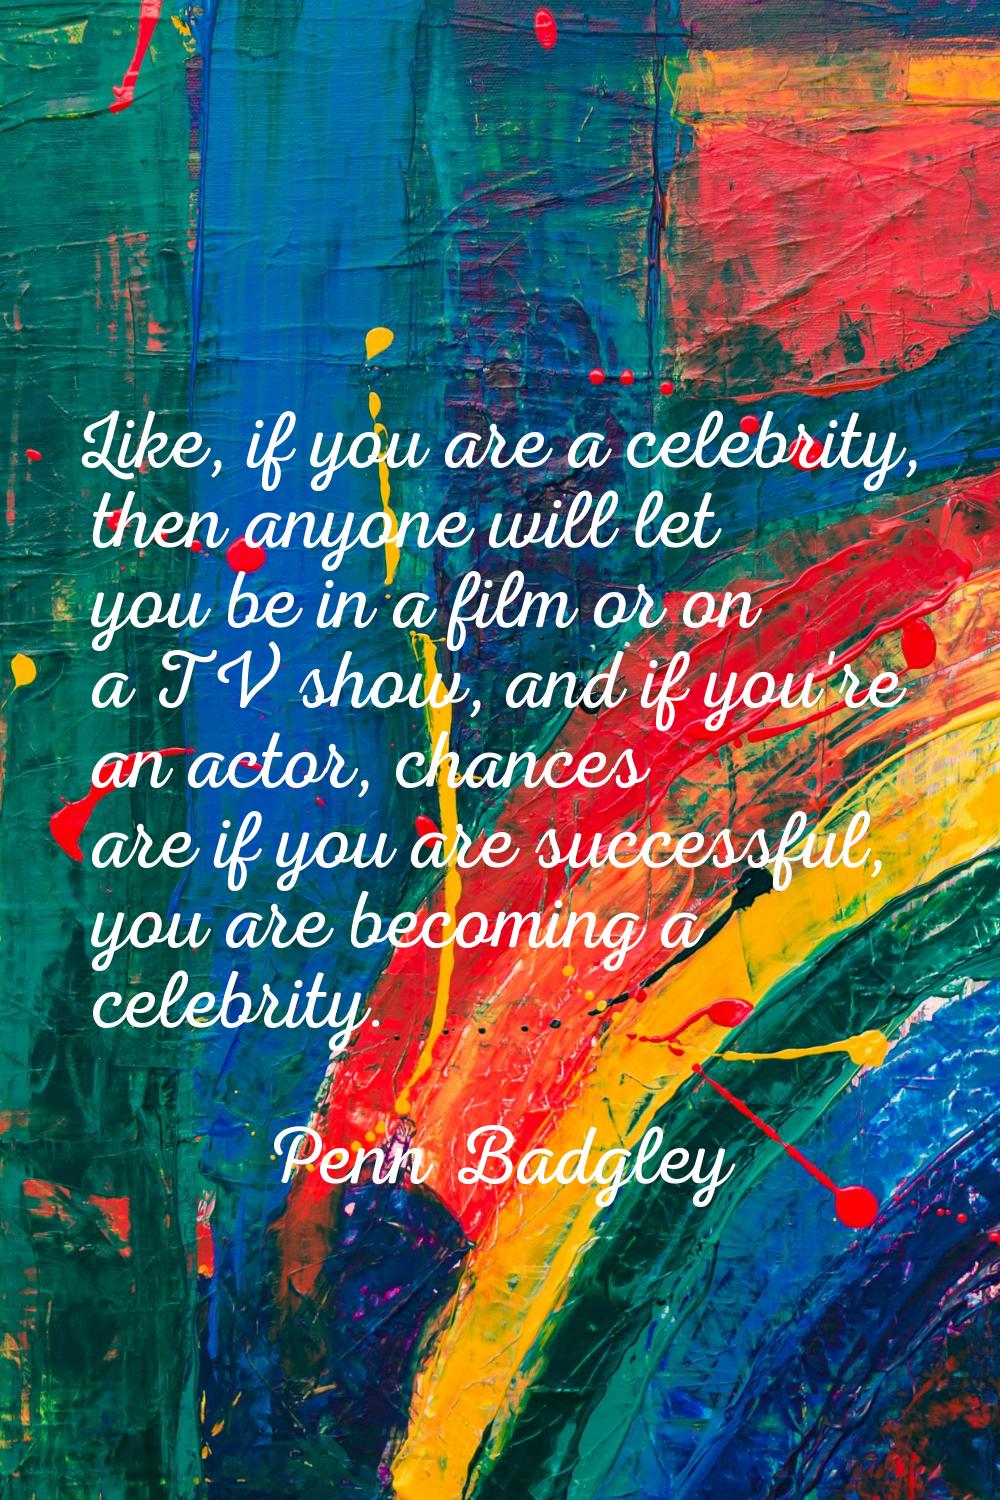 Like, if you are a celebrity, then anyone will let you be in a film or on a TV show, and if you're 